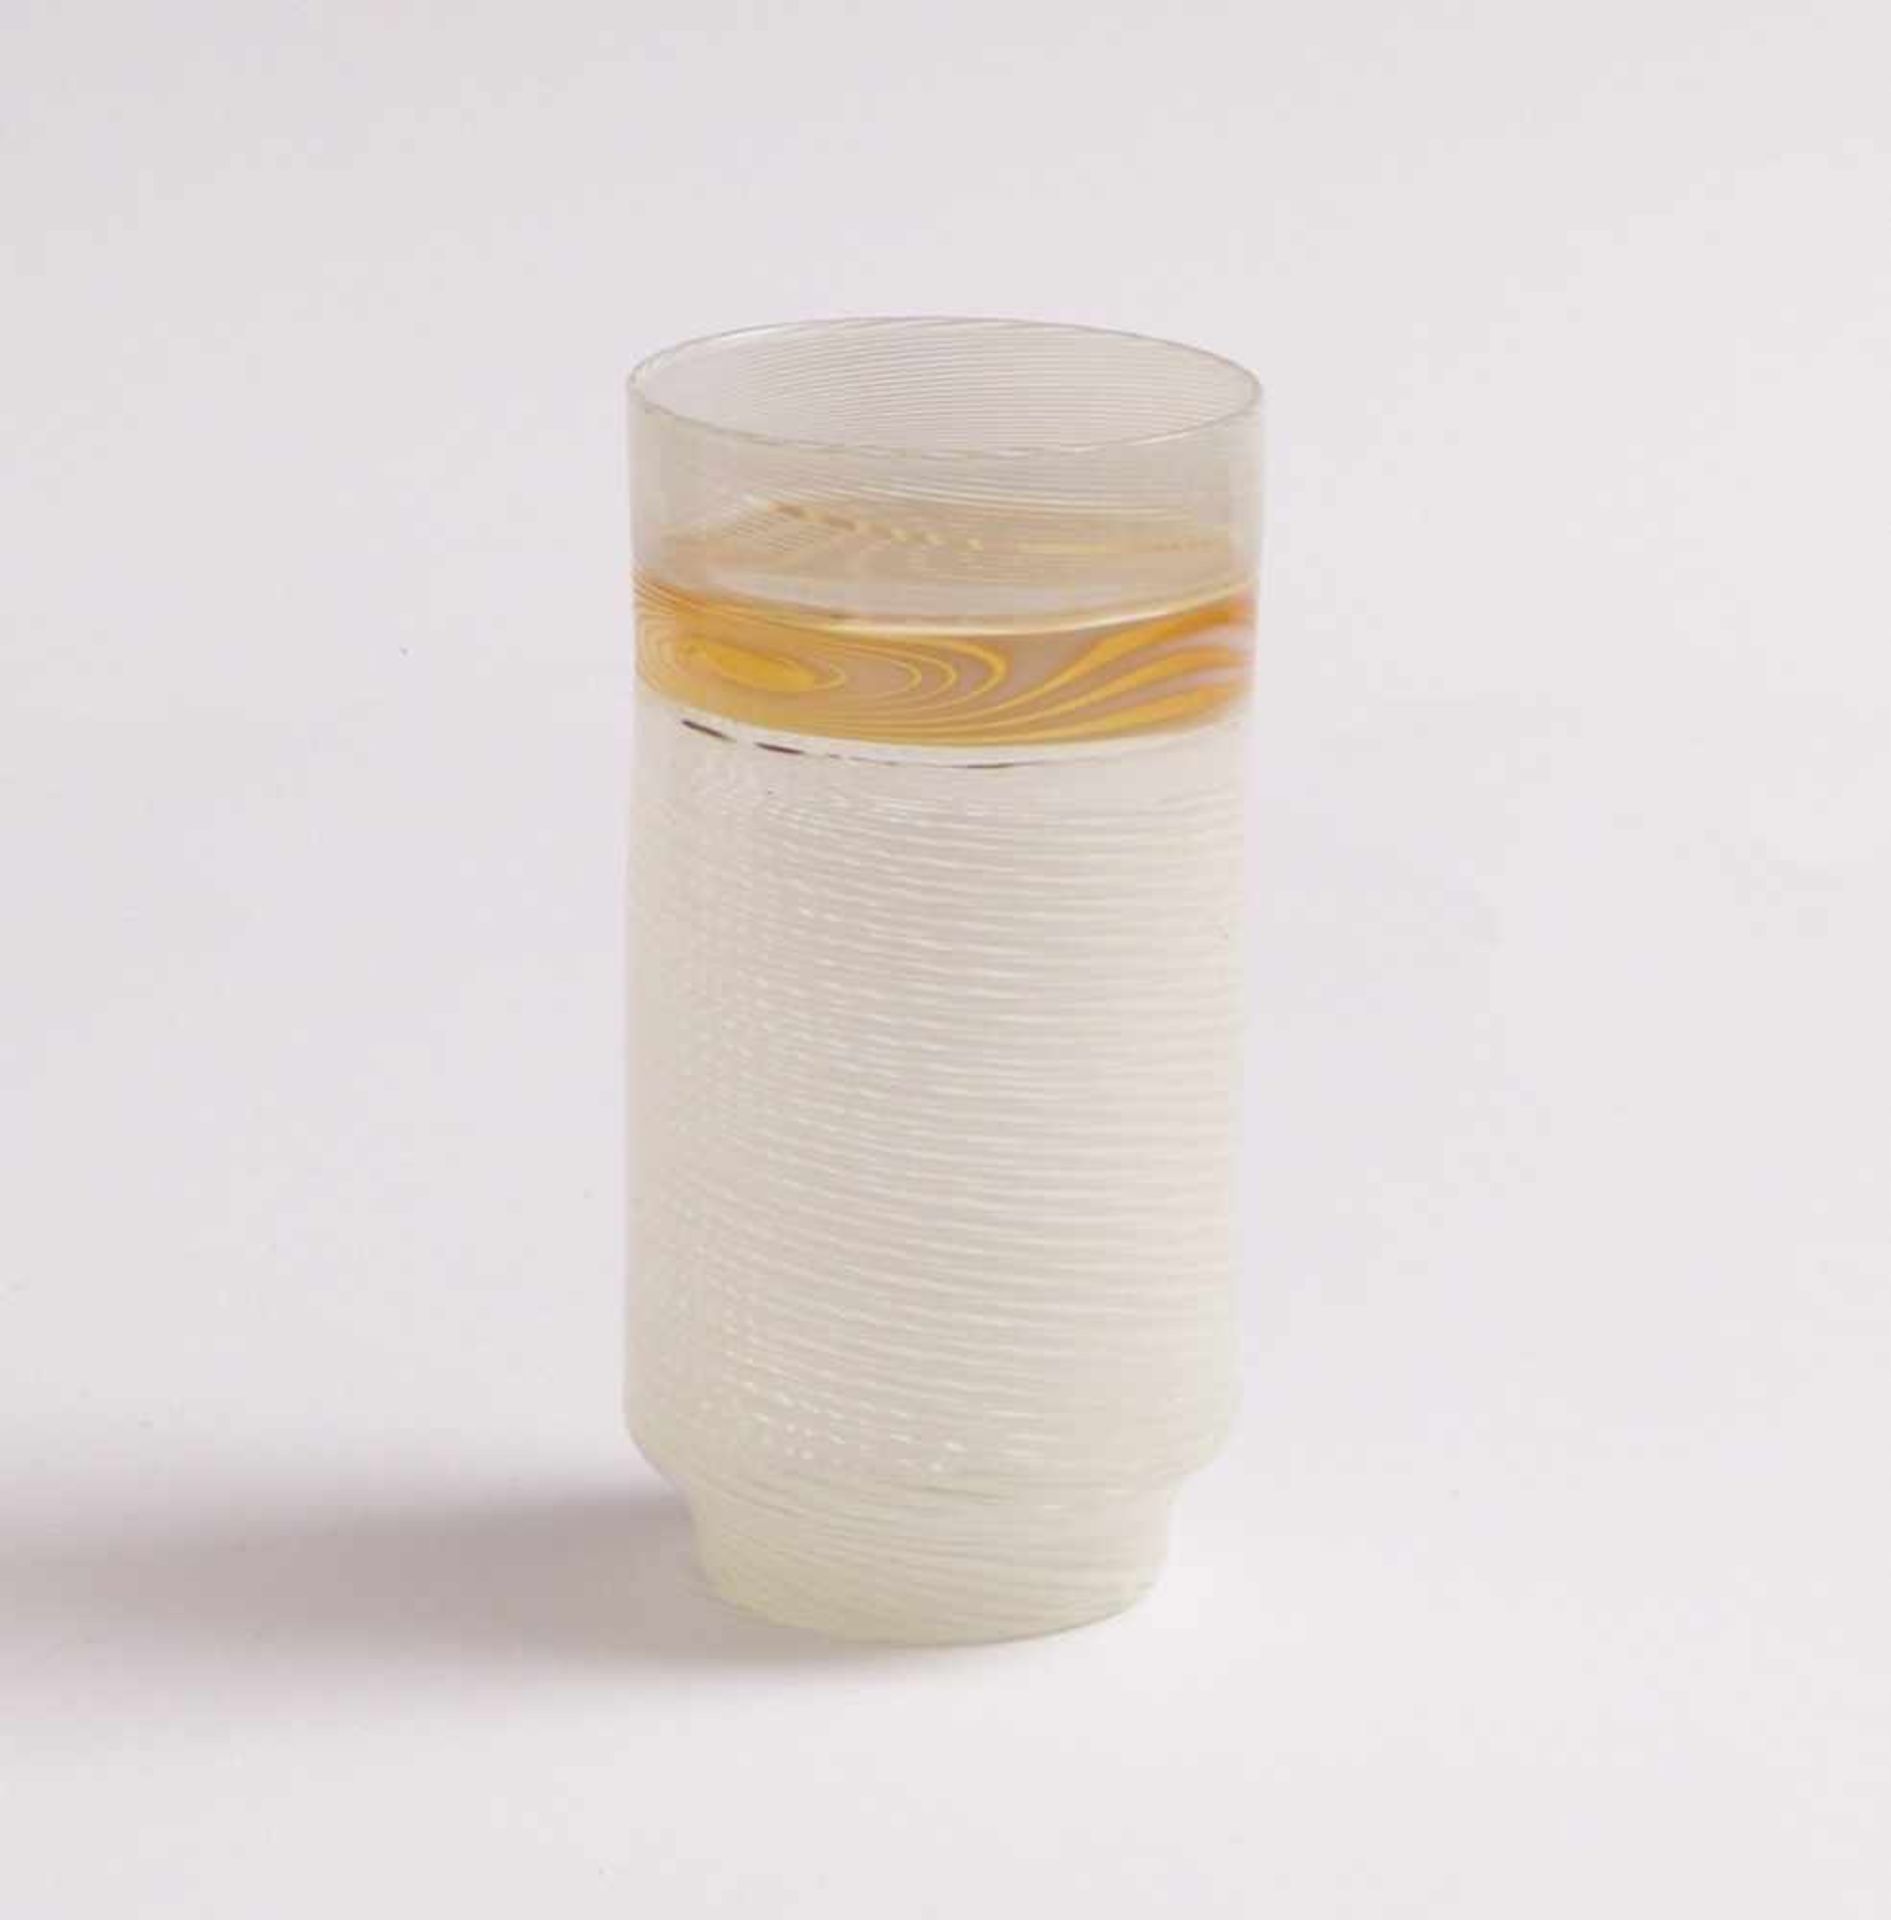 Schindhelm, OttoSmall vase(Lauscha 1920 born) Colorless glass with white and yellow threads. - Image 2 of 2